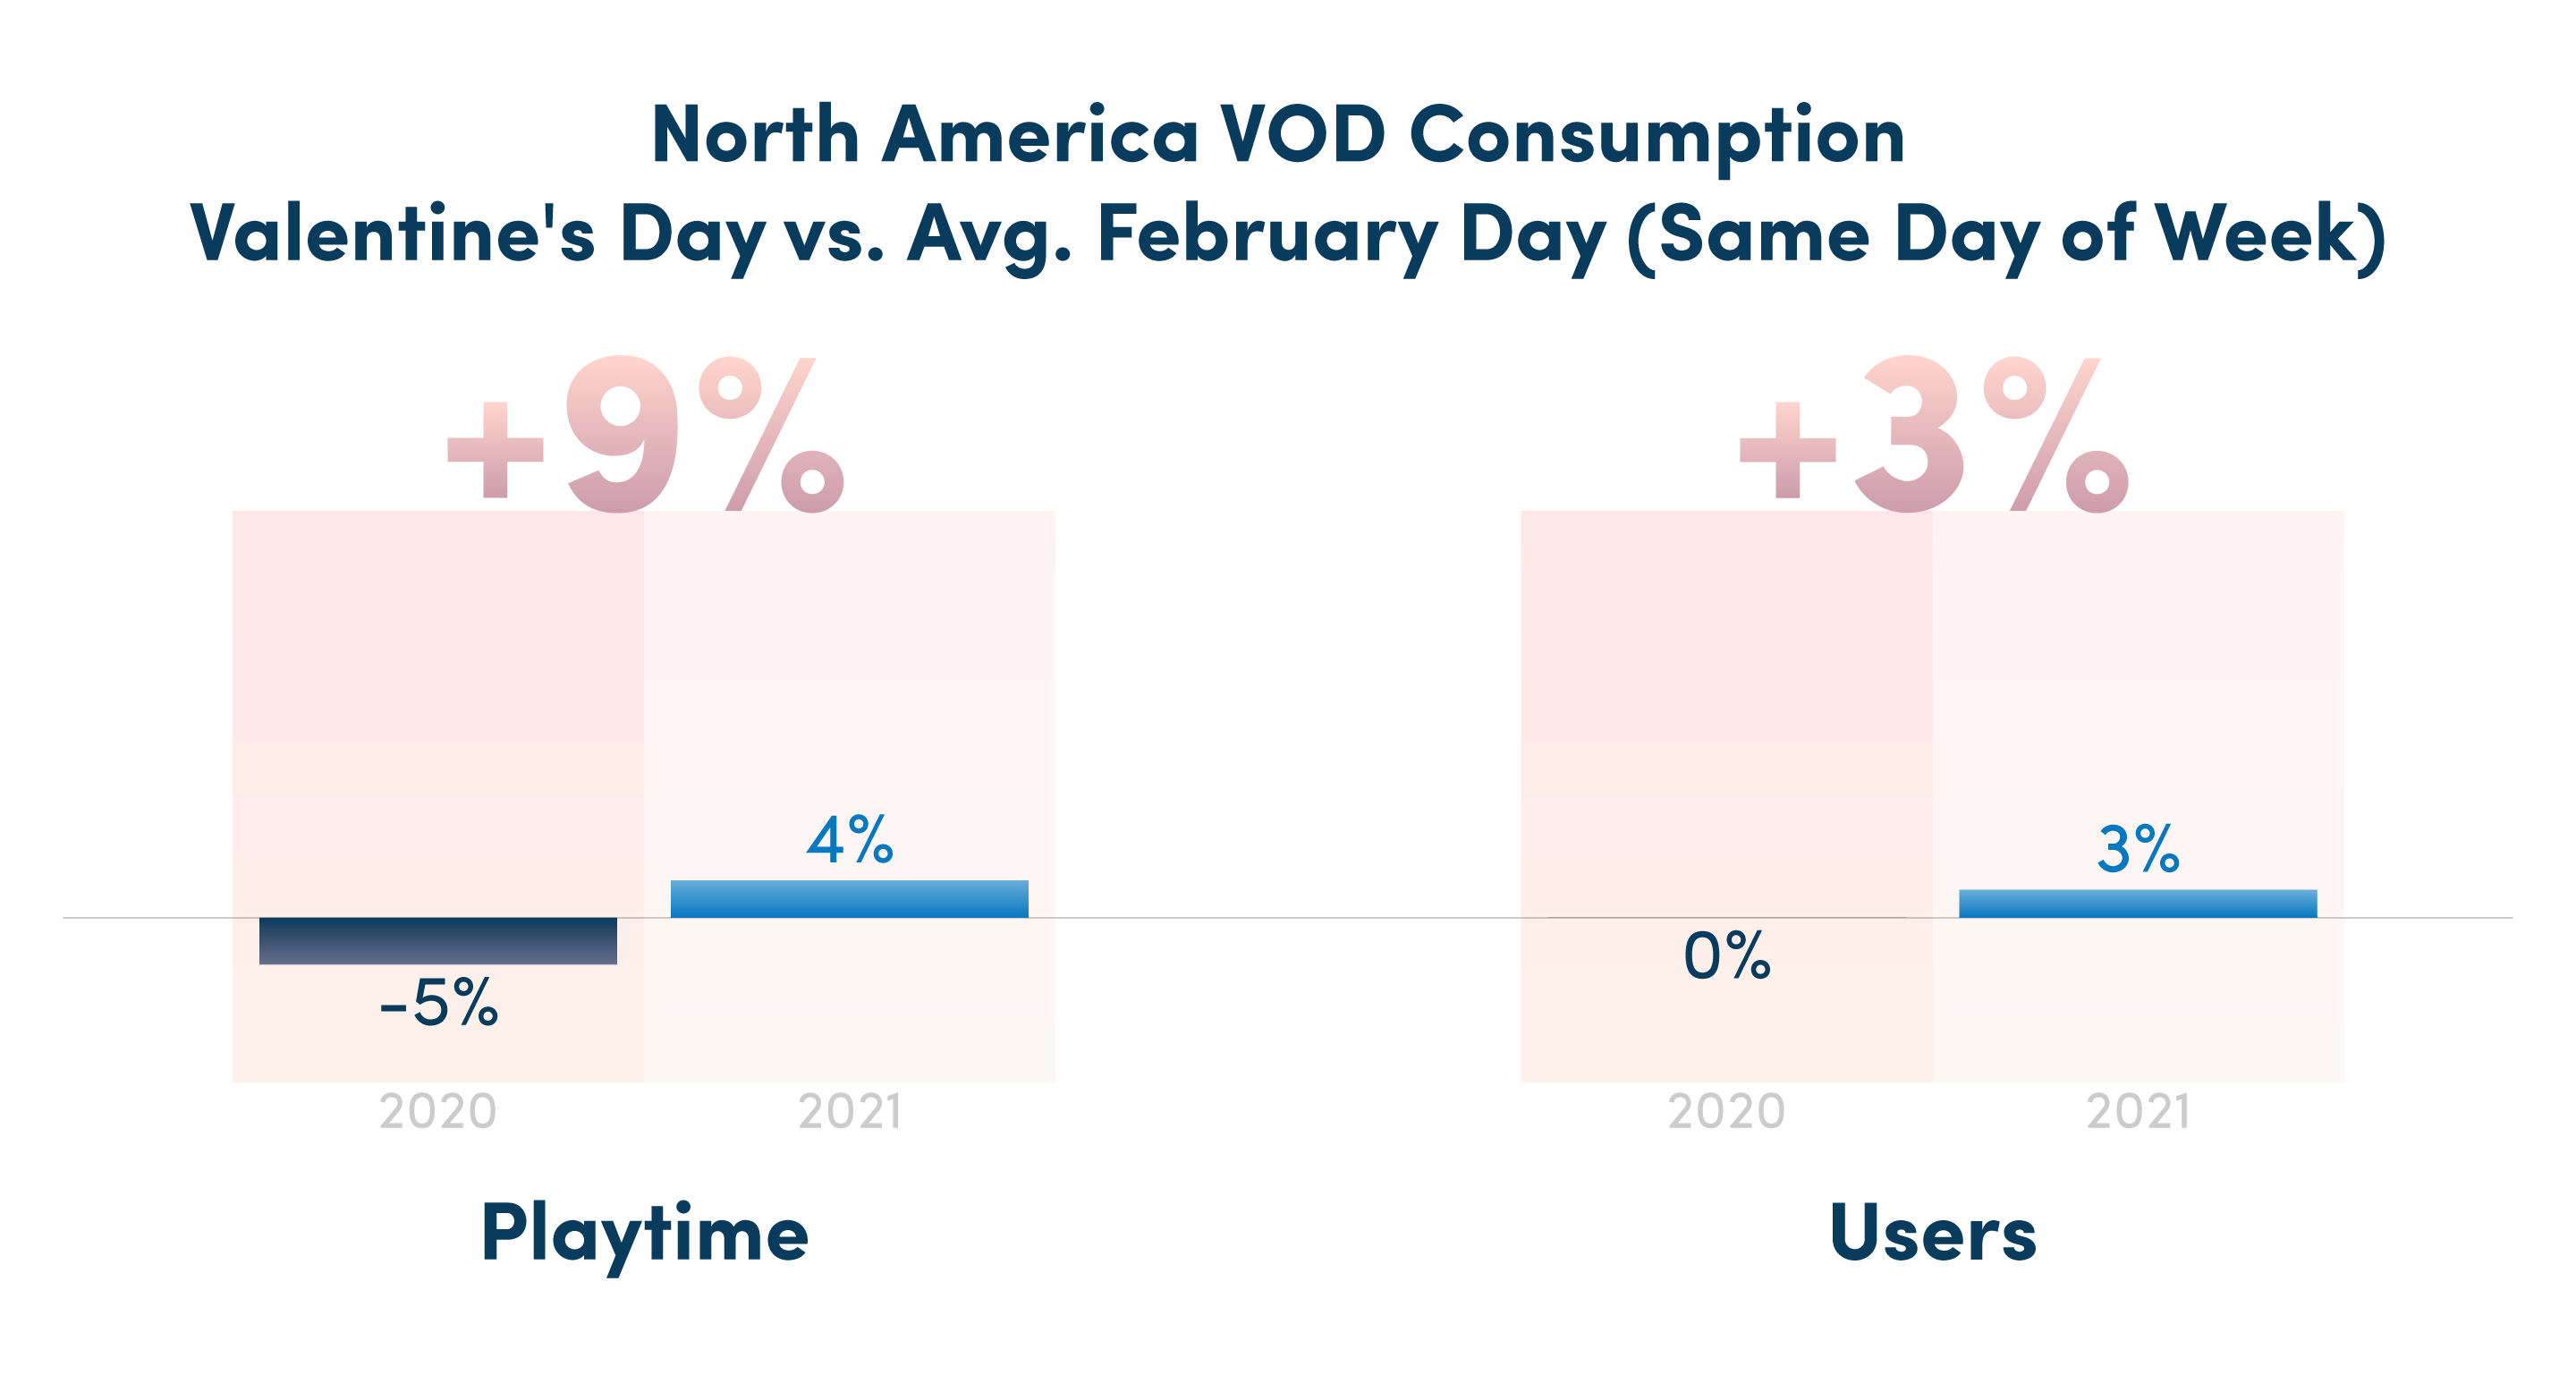 Valentine's day vod consumption up in 2021 for the same day